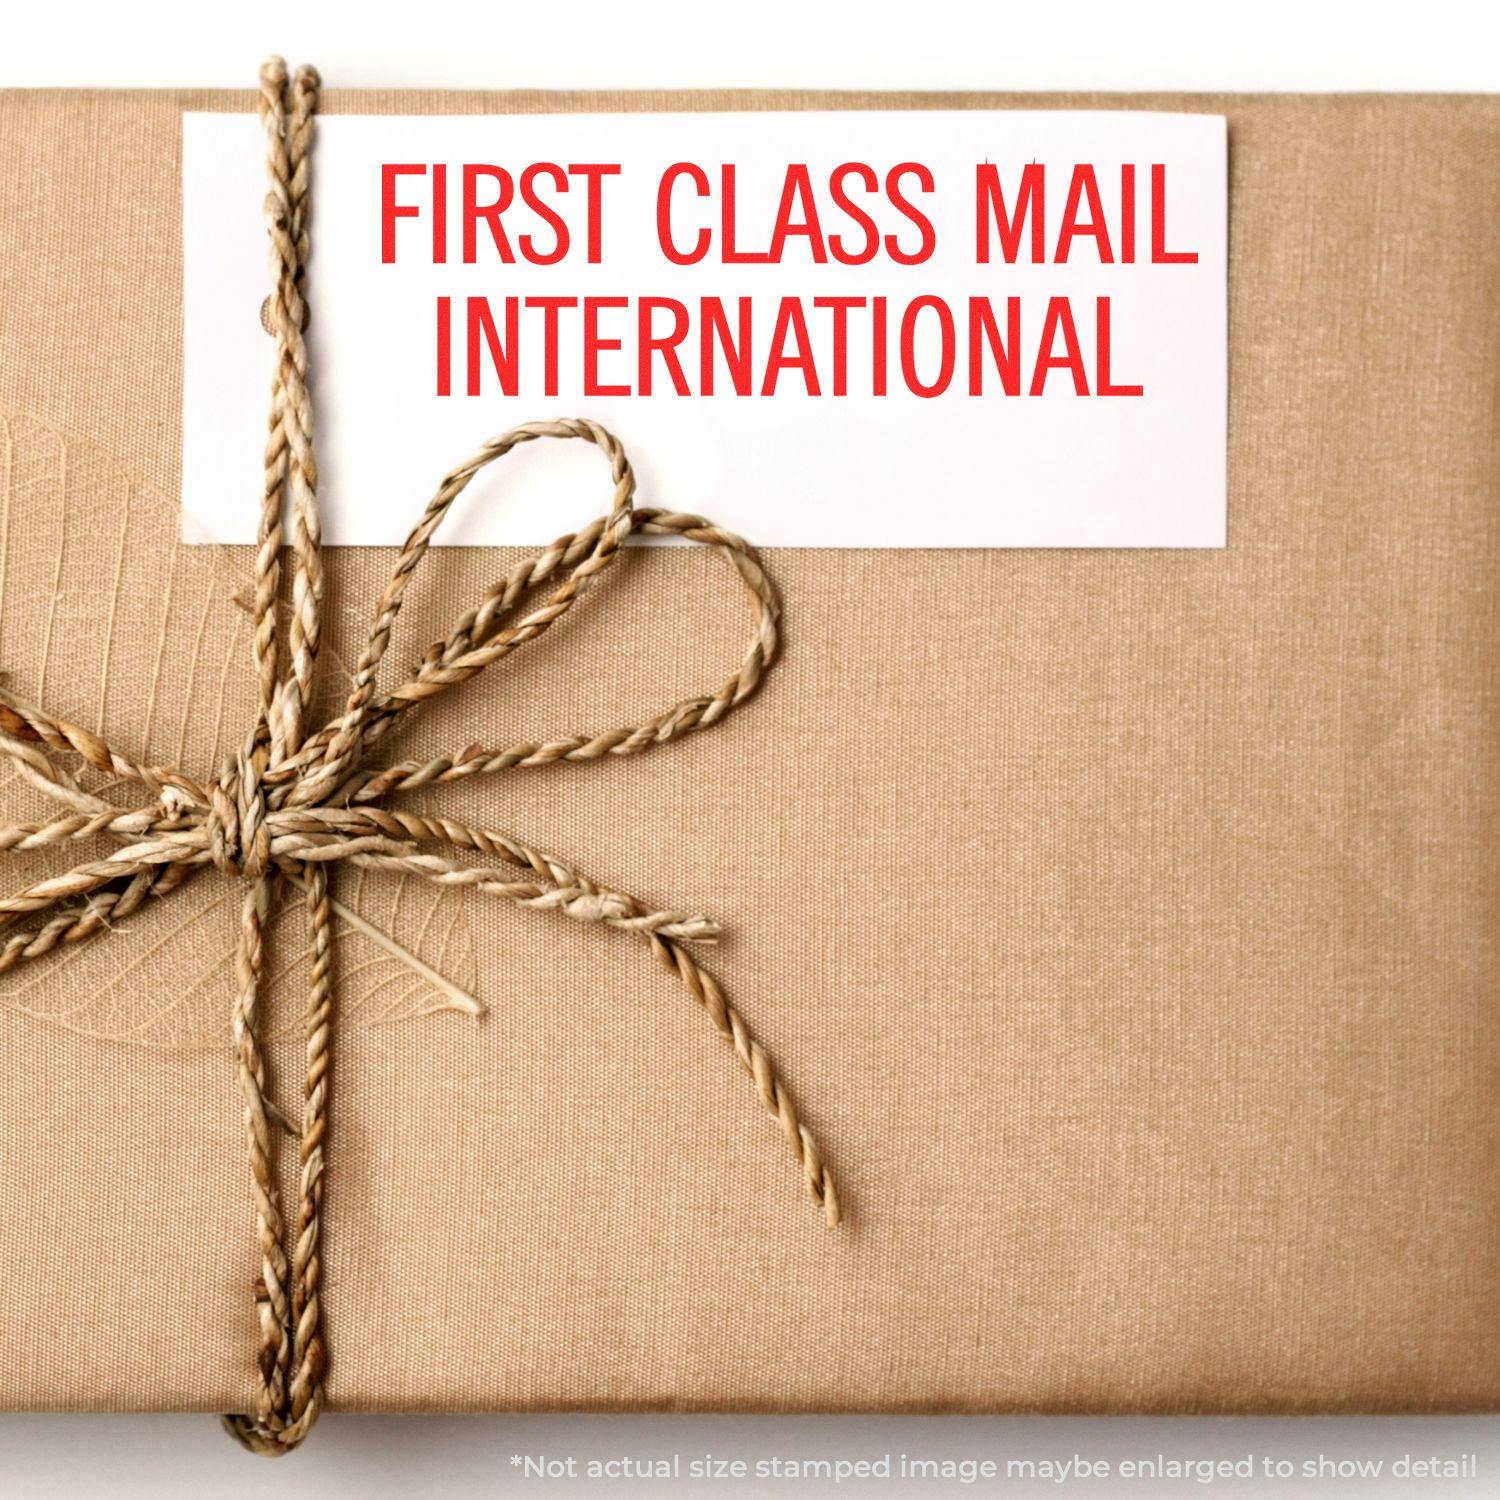 A stock office pre-inked stamp with a stamped image showing how the text "FIRST CLASS MAIL INTERNATIONAL" is displayed after stamping.